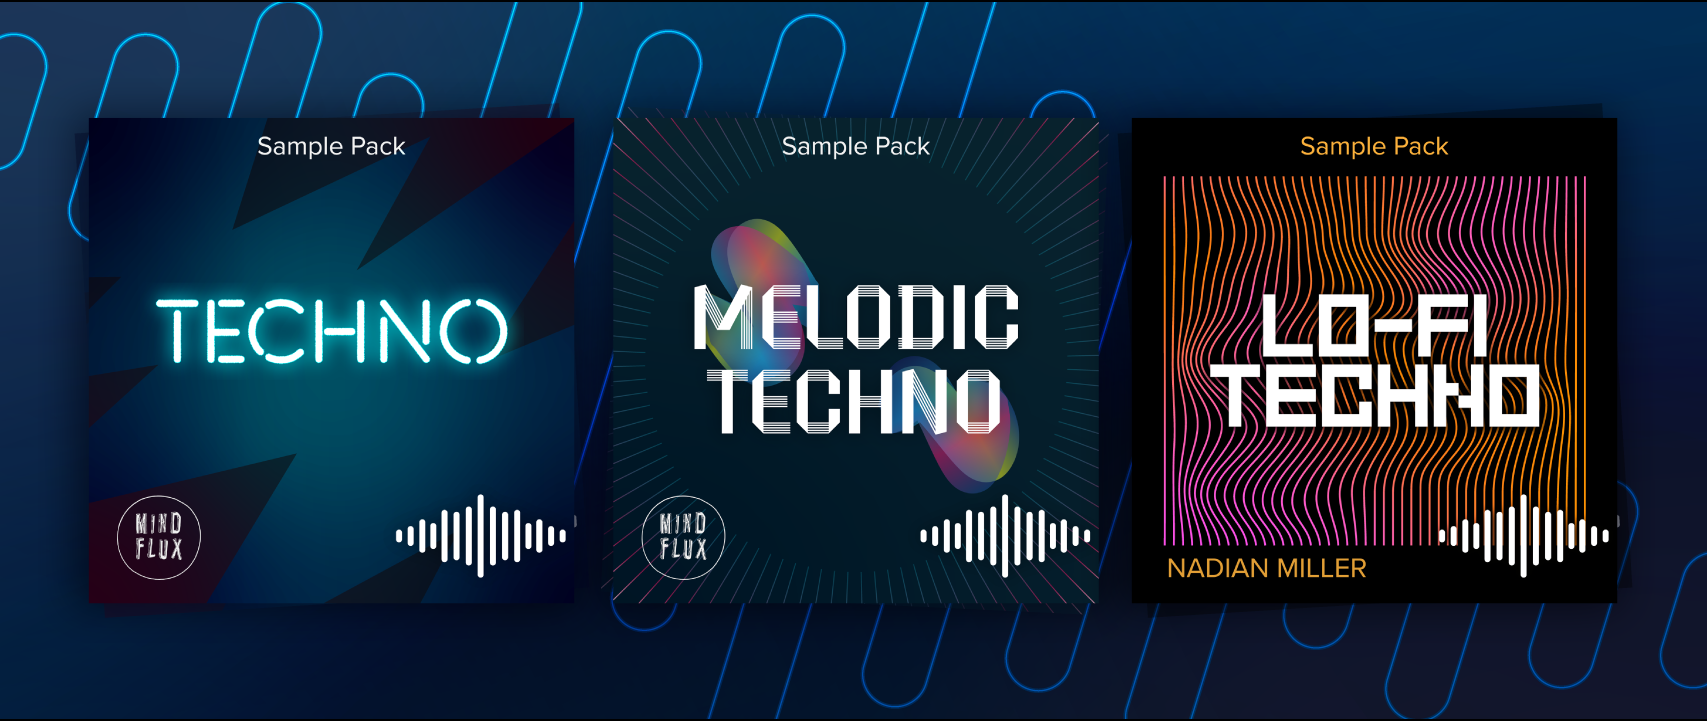 Techno Robbo plugin pack for PaintNET